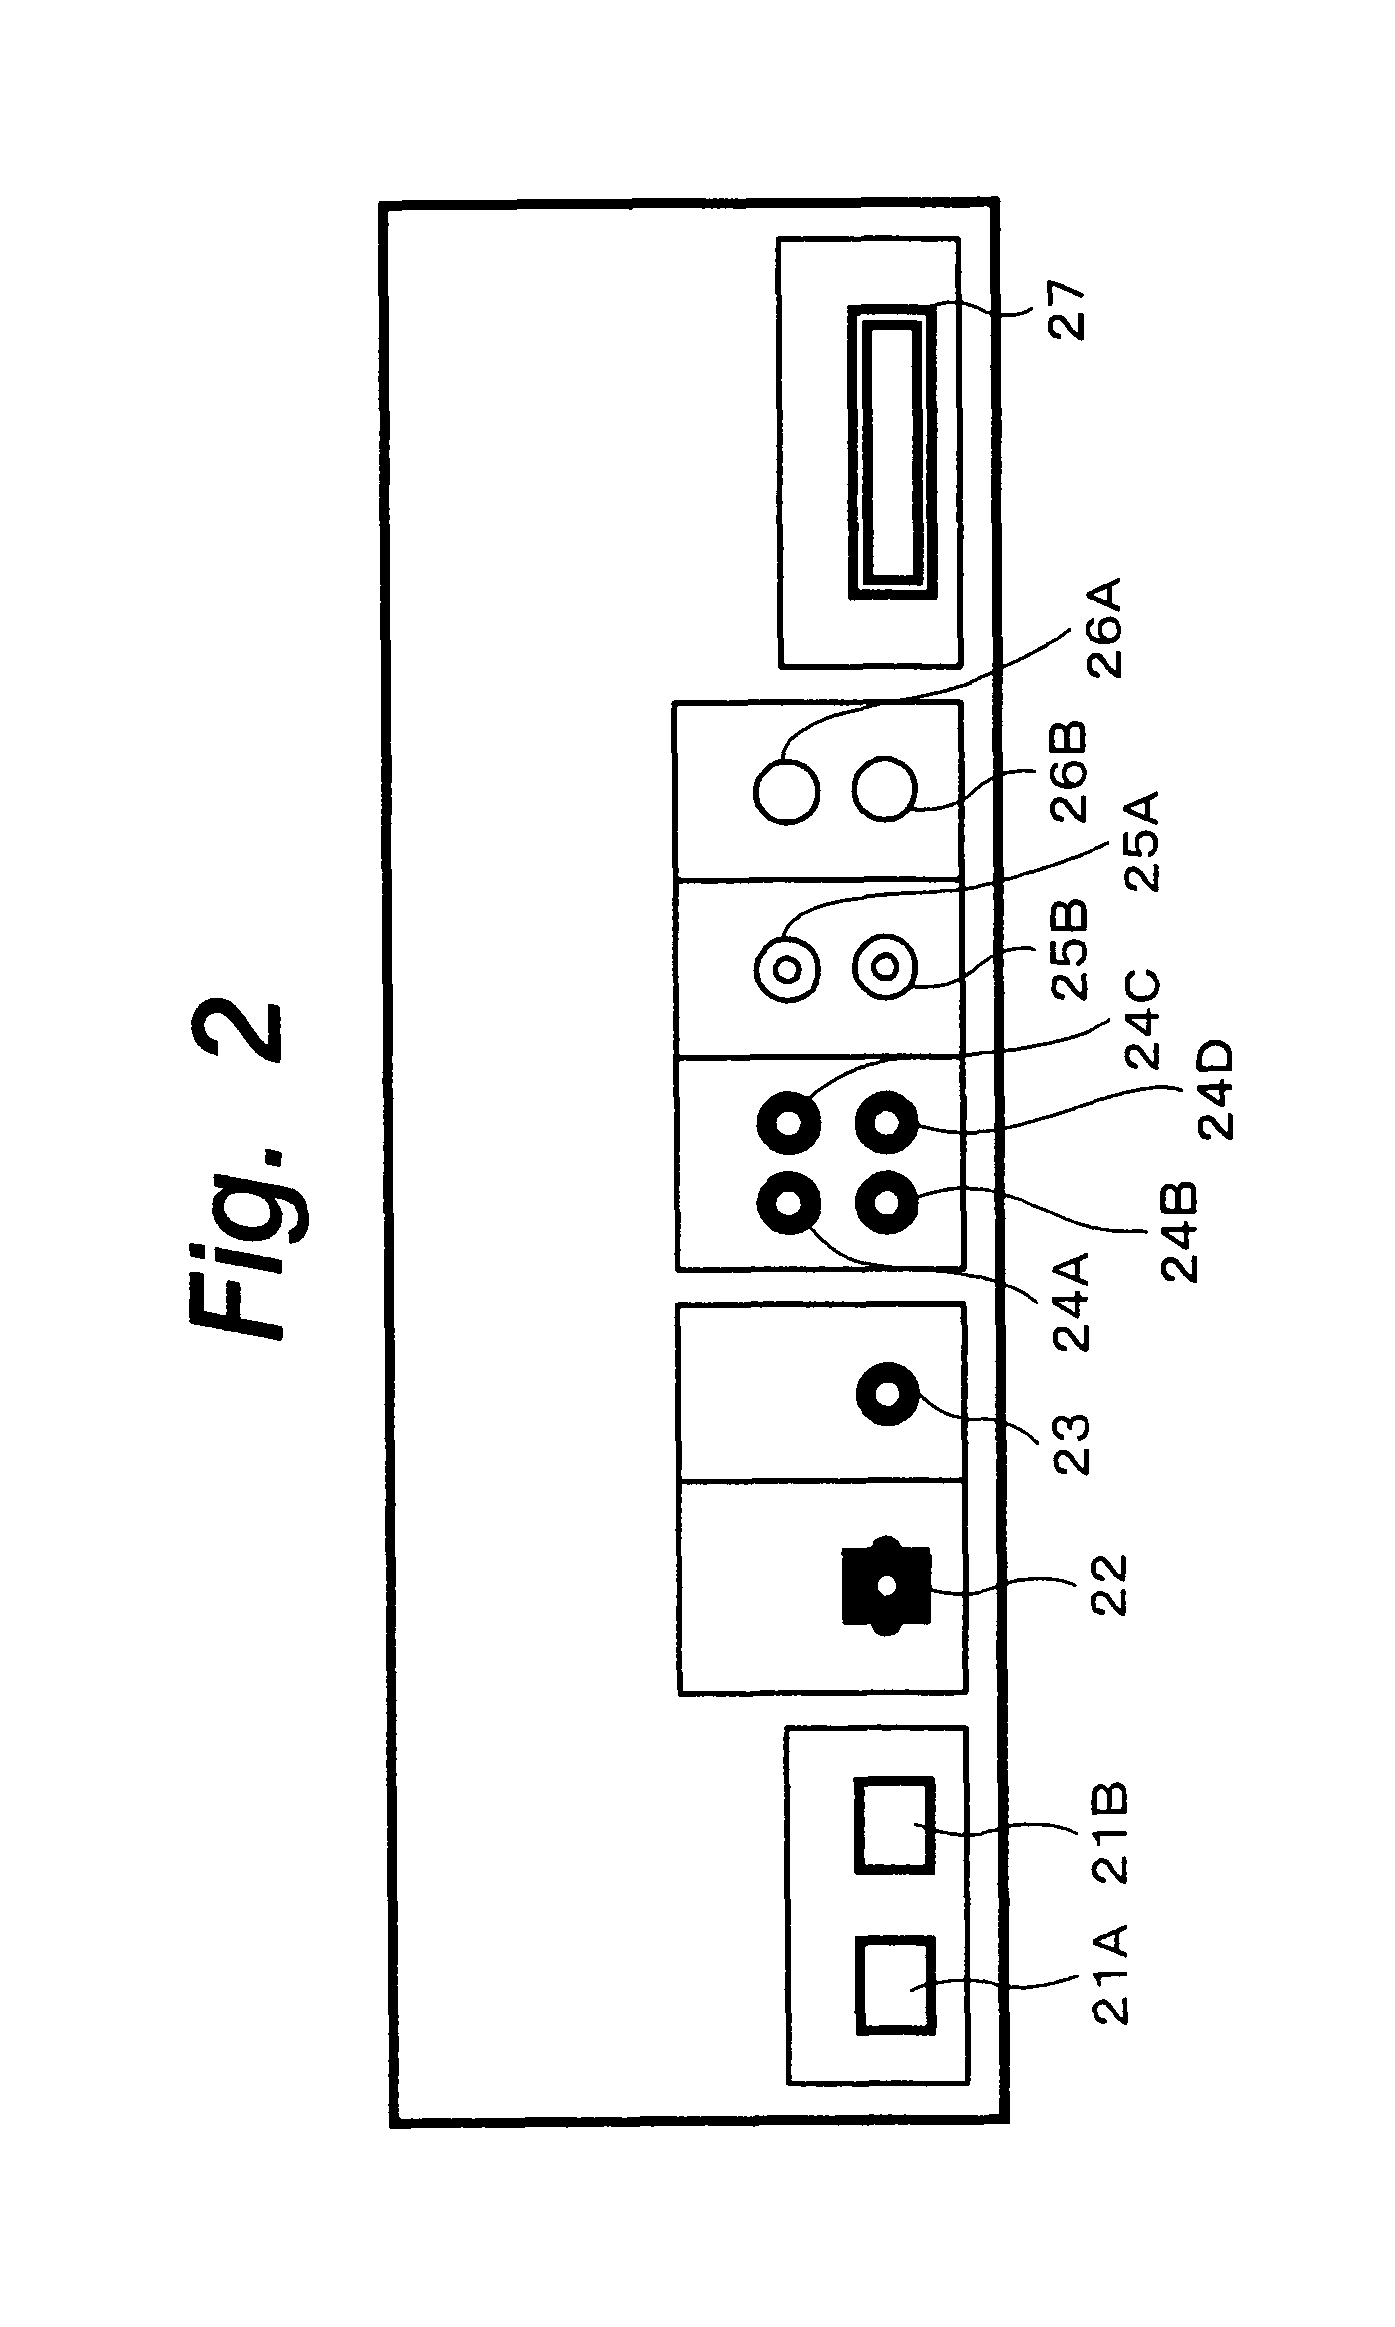 Receiving system for digital broadcasting and receiving apparatus for digital broadcasting